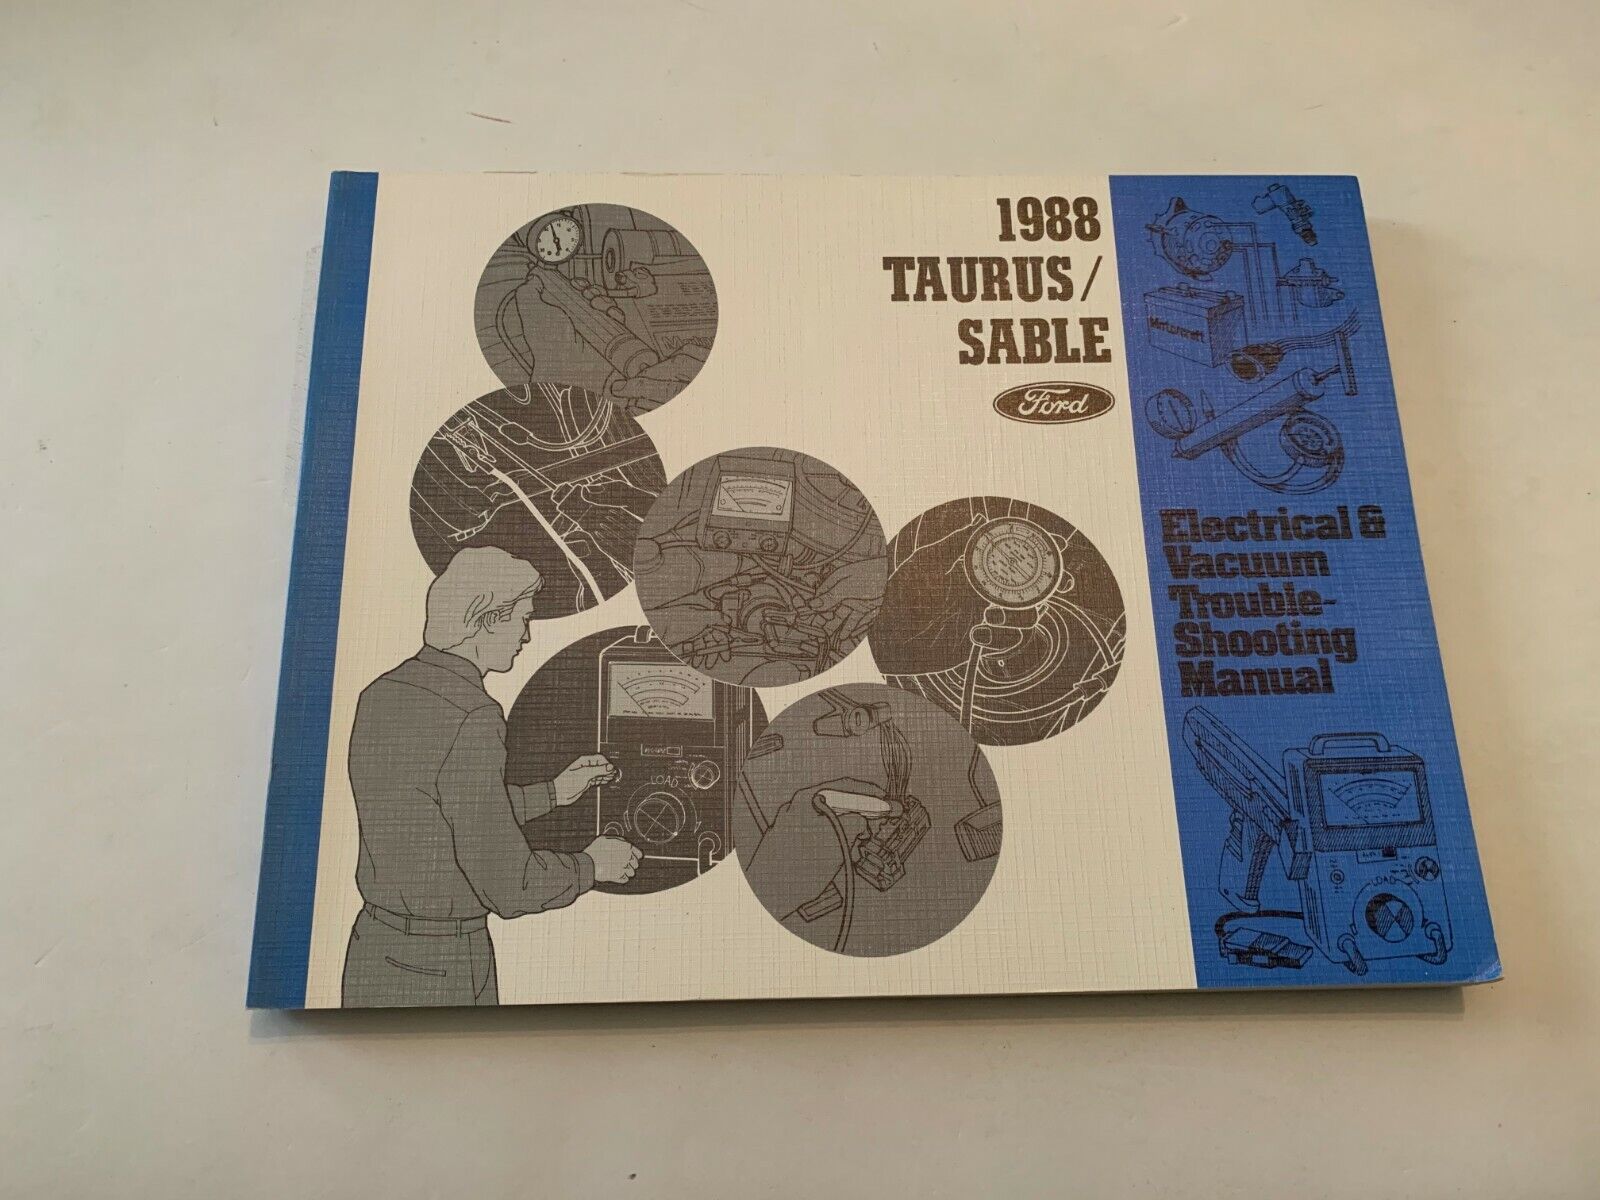 1988 Ford Taurus Sable Electrical & Vacuum Troubleshooting Manual Softcover